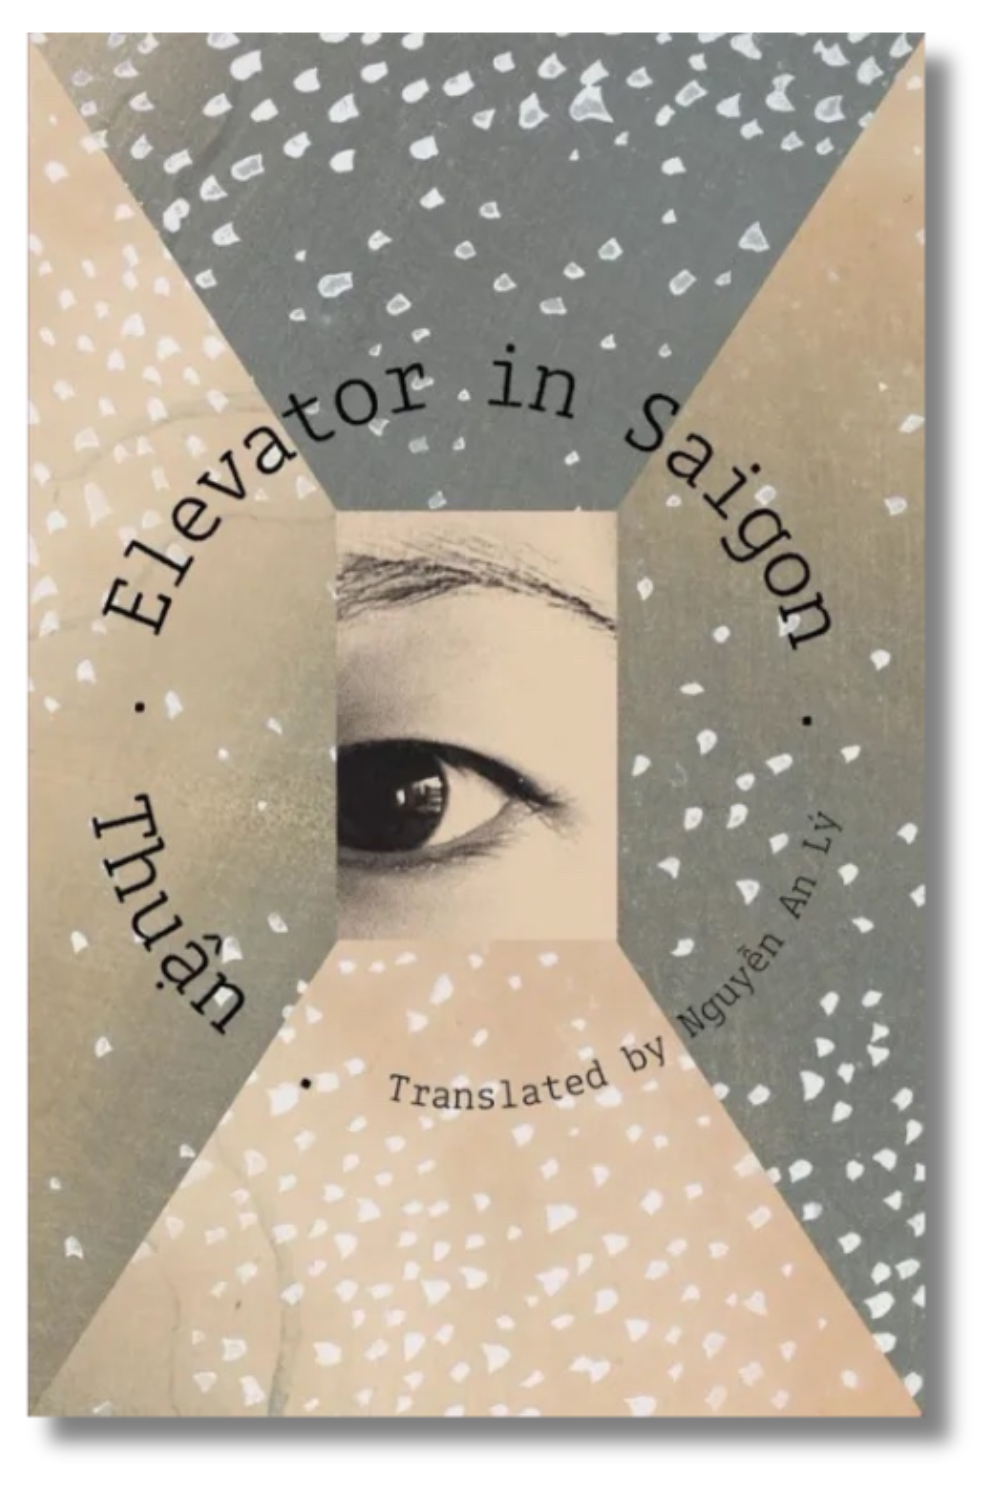 The cover of "Elevator in Saigon" by Thuan, tr. by Nguyen An Ly